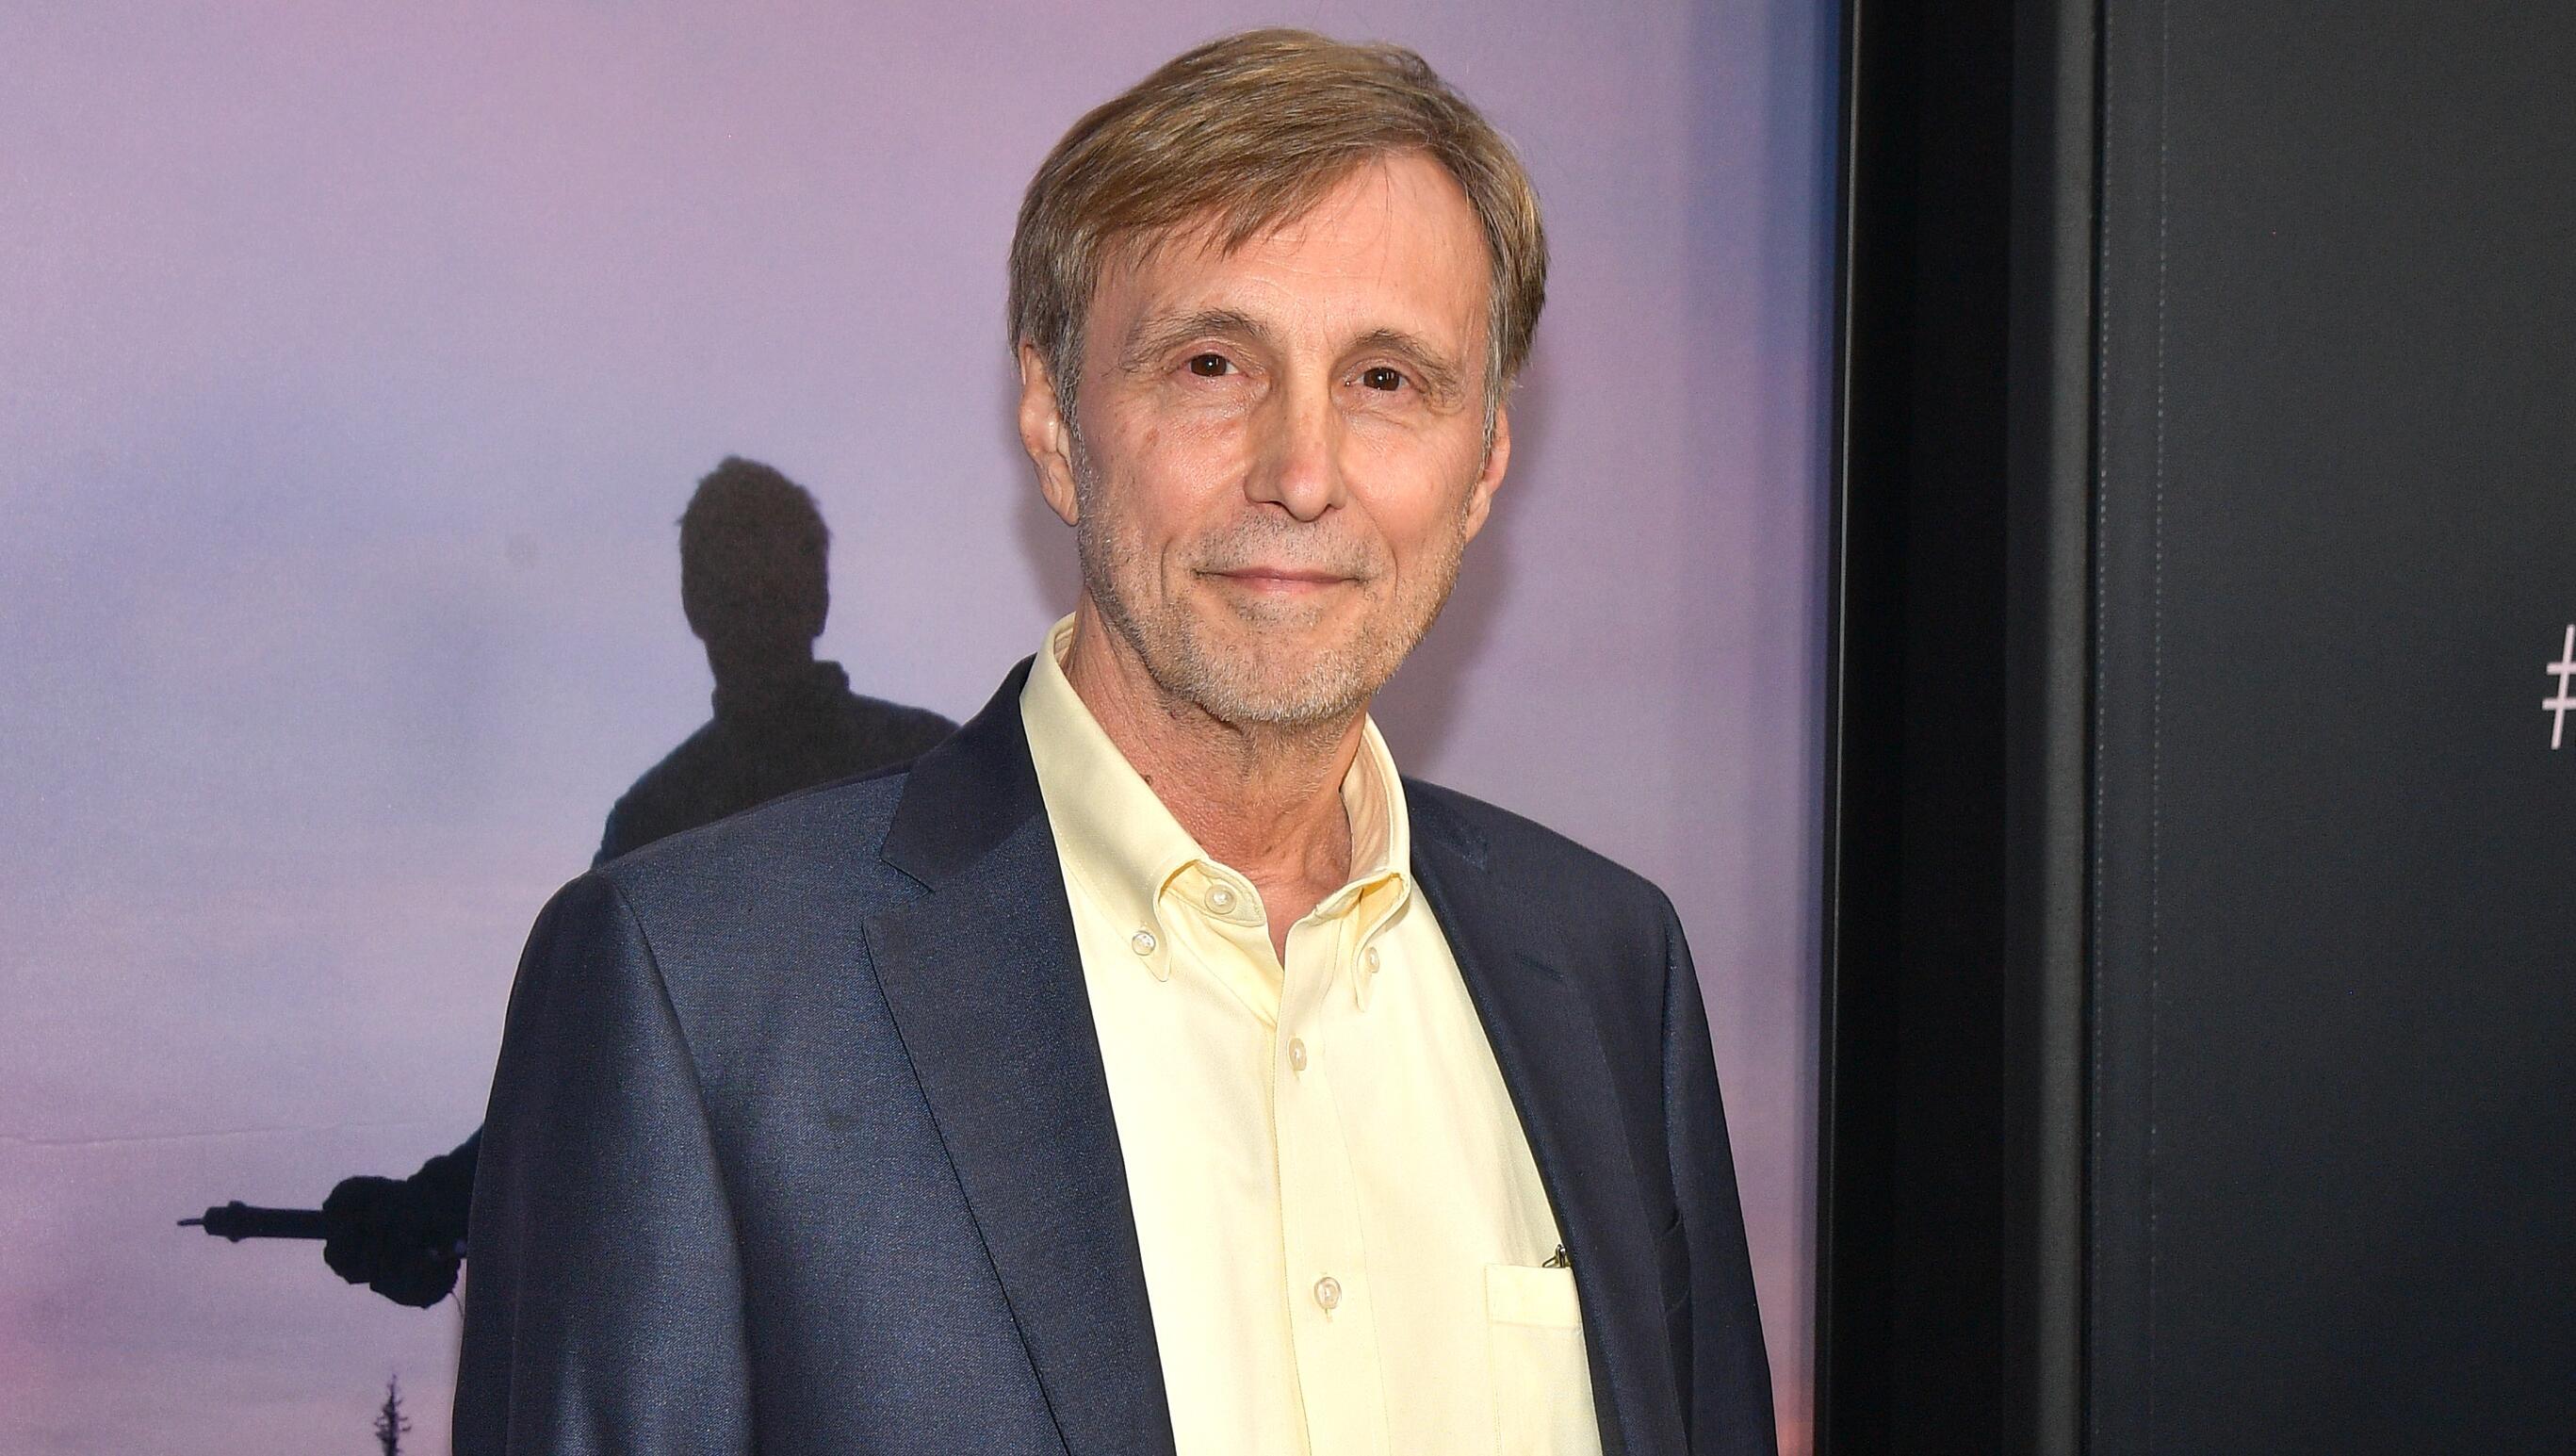 Thom Hartmann is coming to the Bay Area